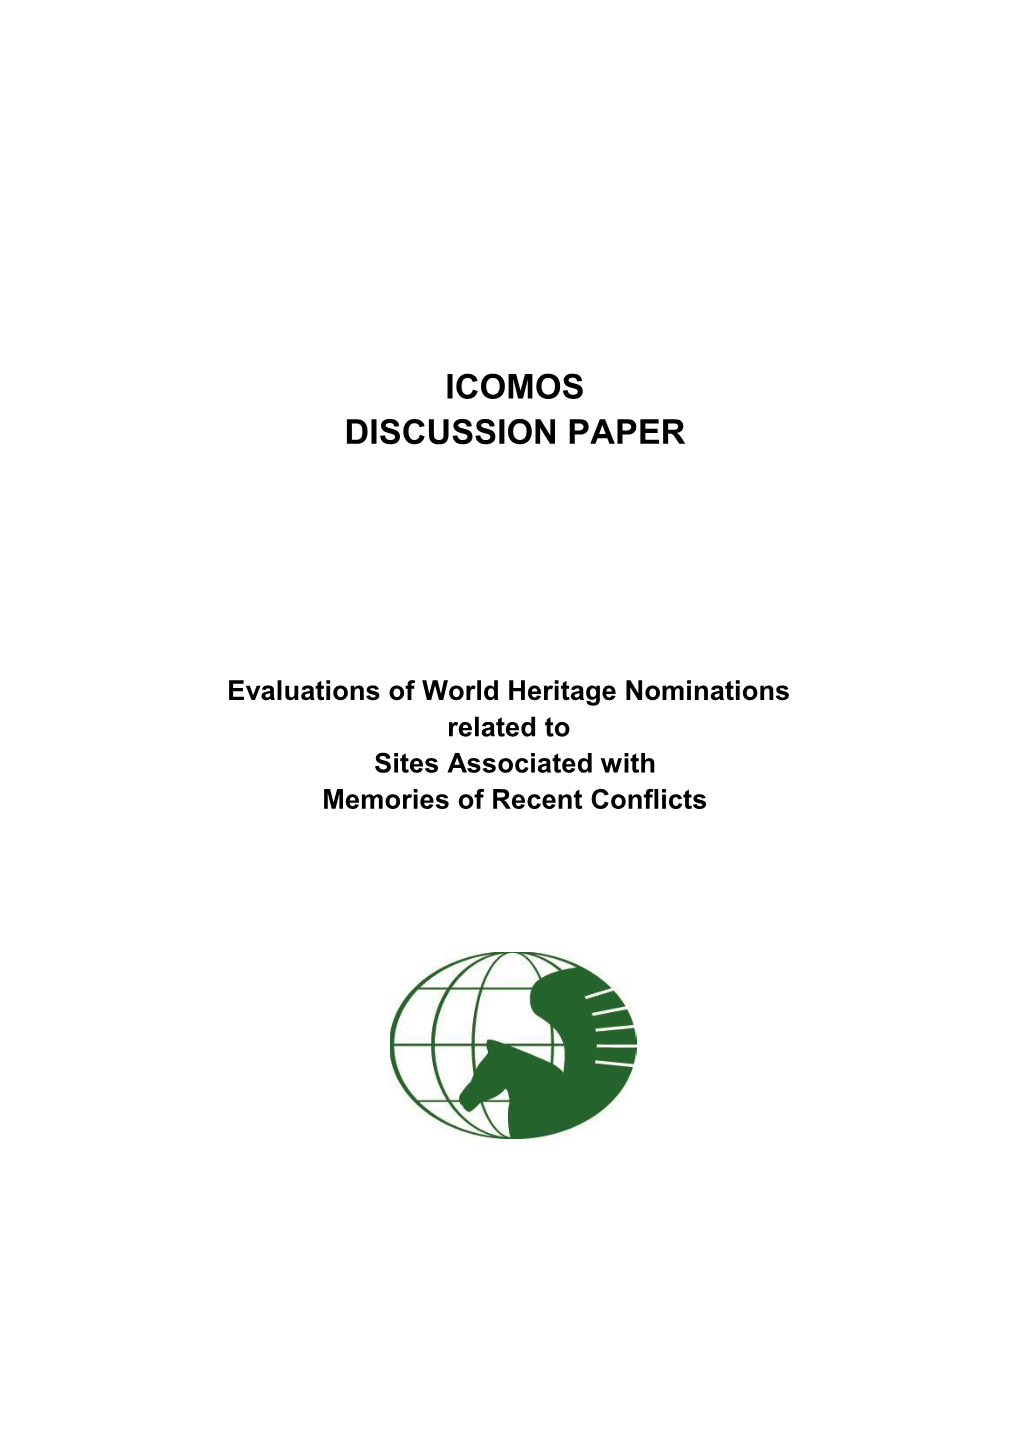 Evaluations of World Heritage Nominations Related to Sites Associated with Memories of Recent Conflicts